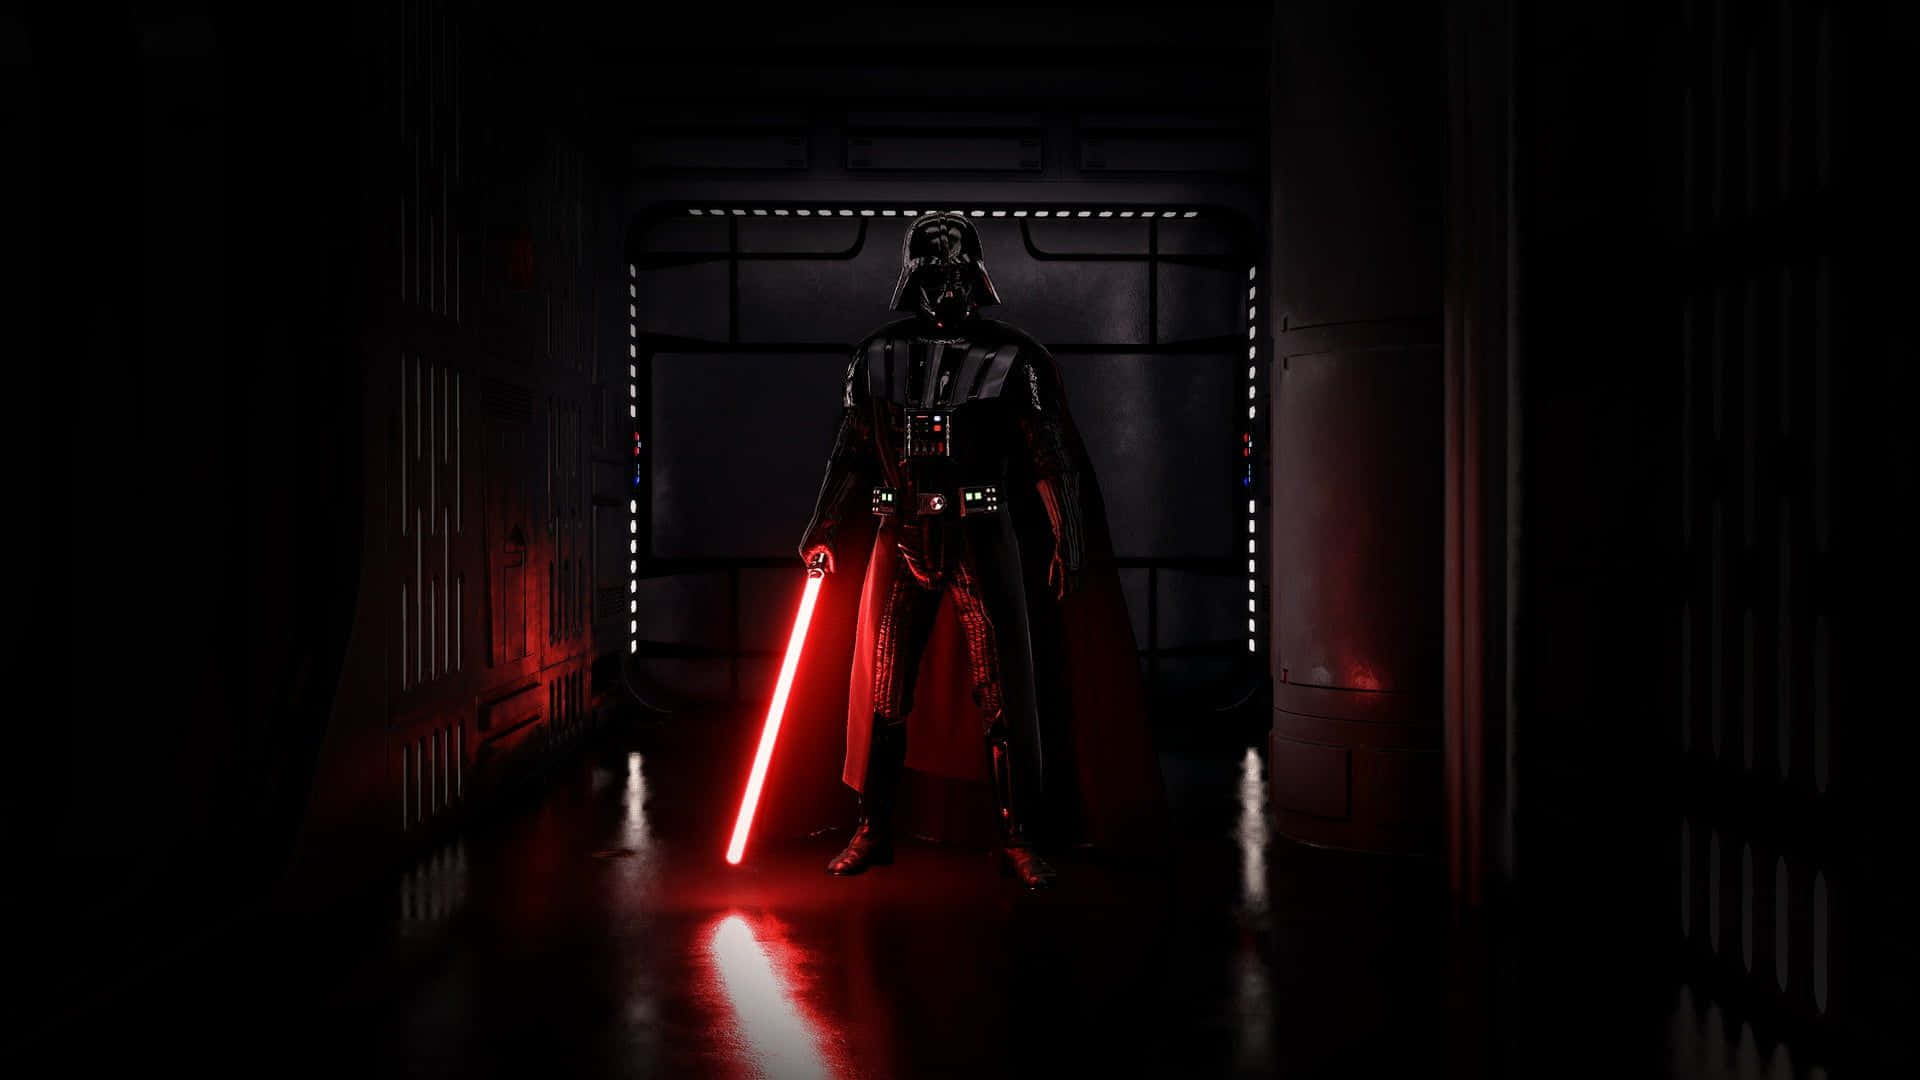 Darth Vader, a character from the Star Wars universe